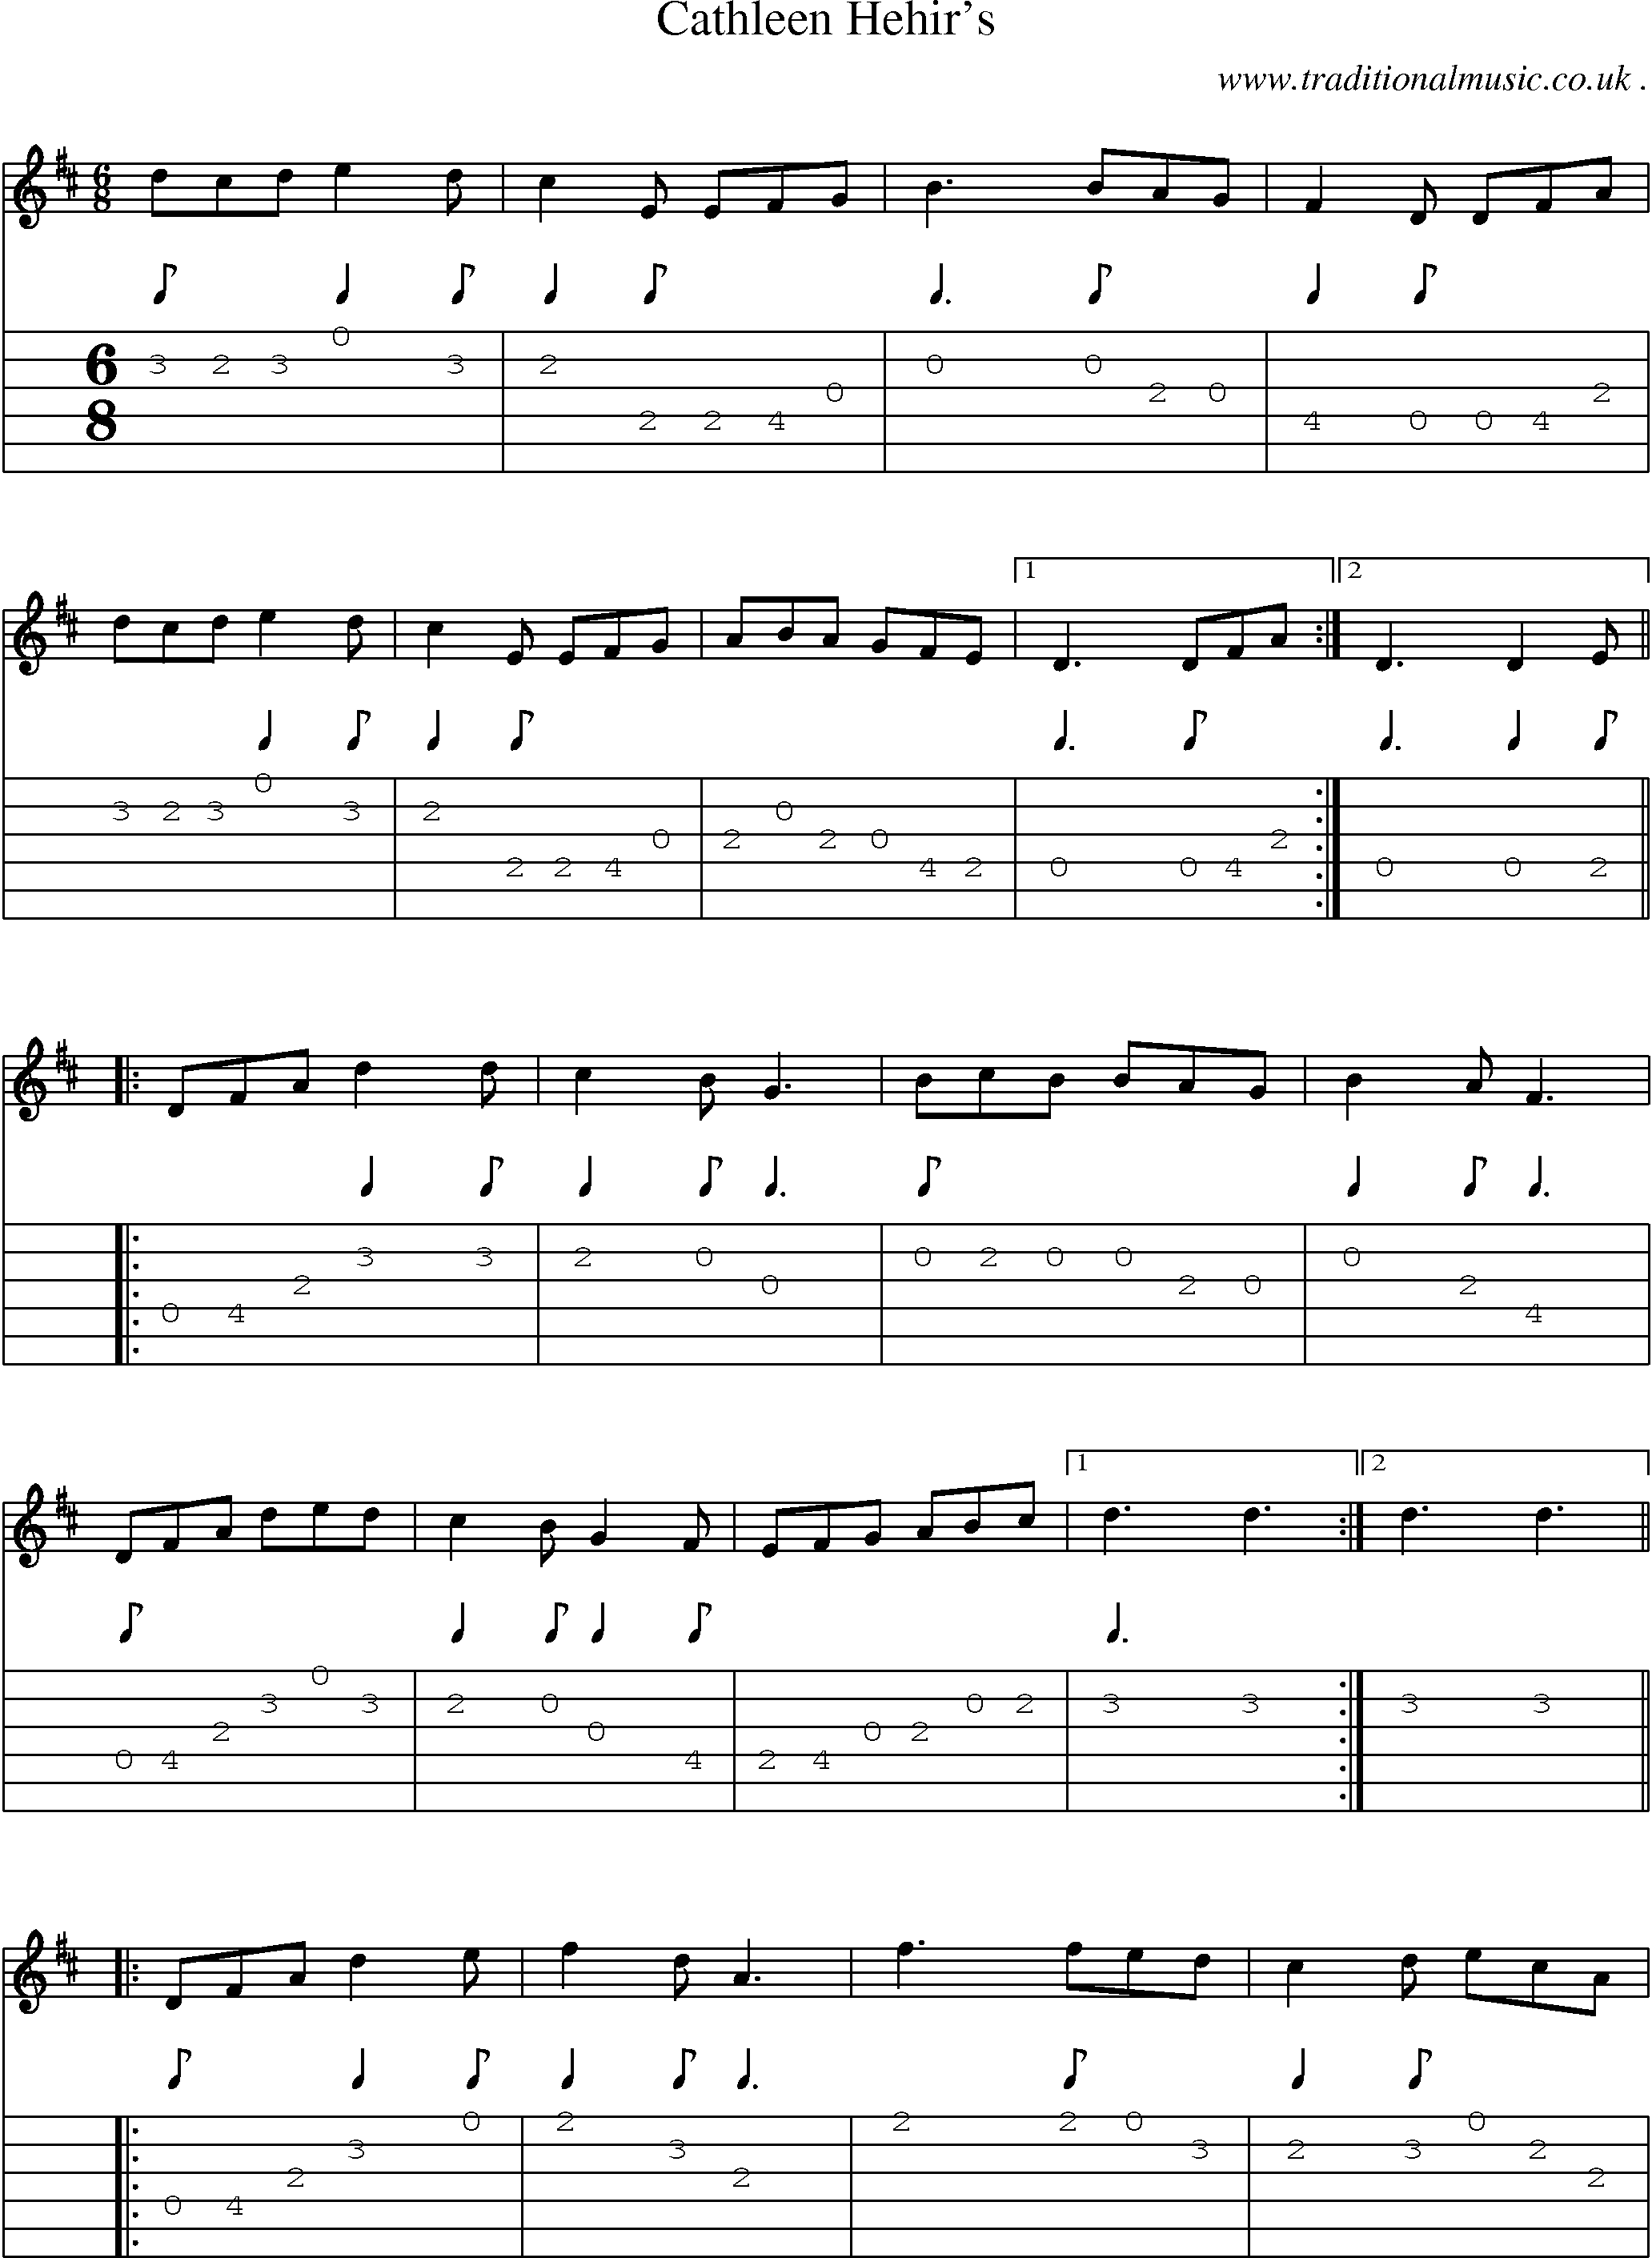 Sheet-Music and Guitar Tabs for Cathleen Hehirs